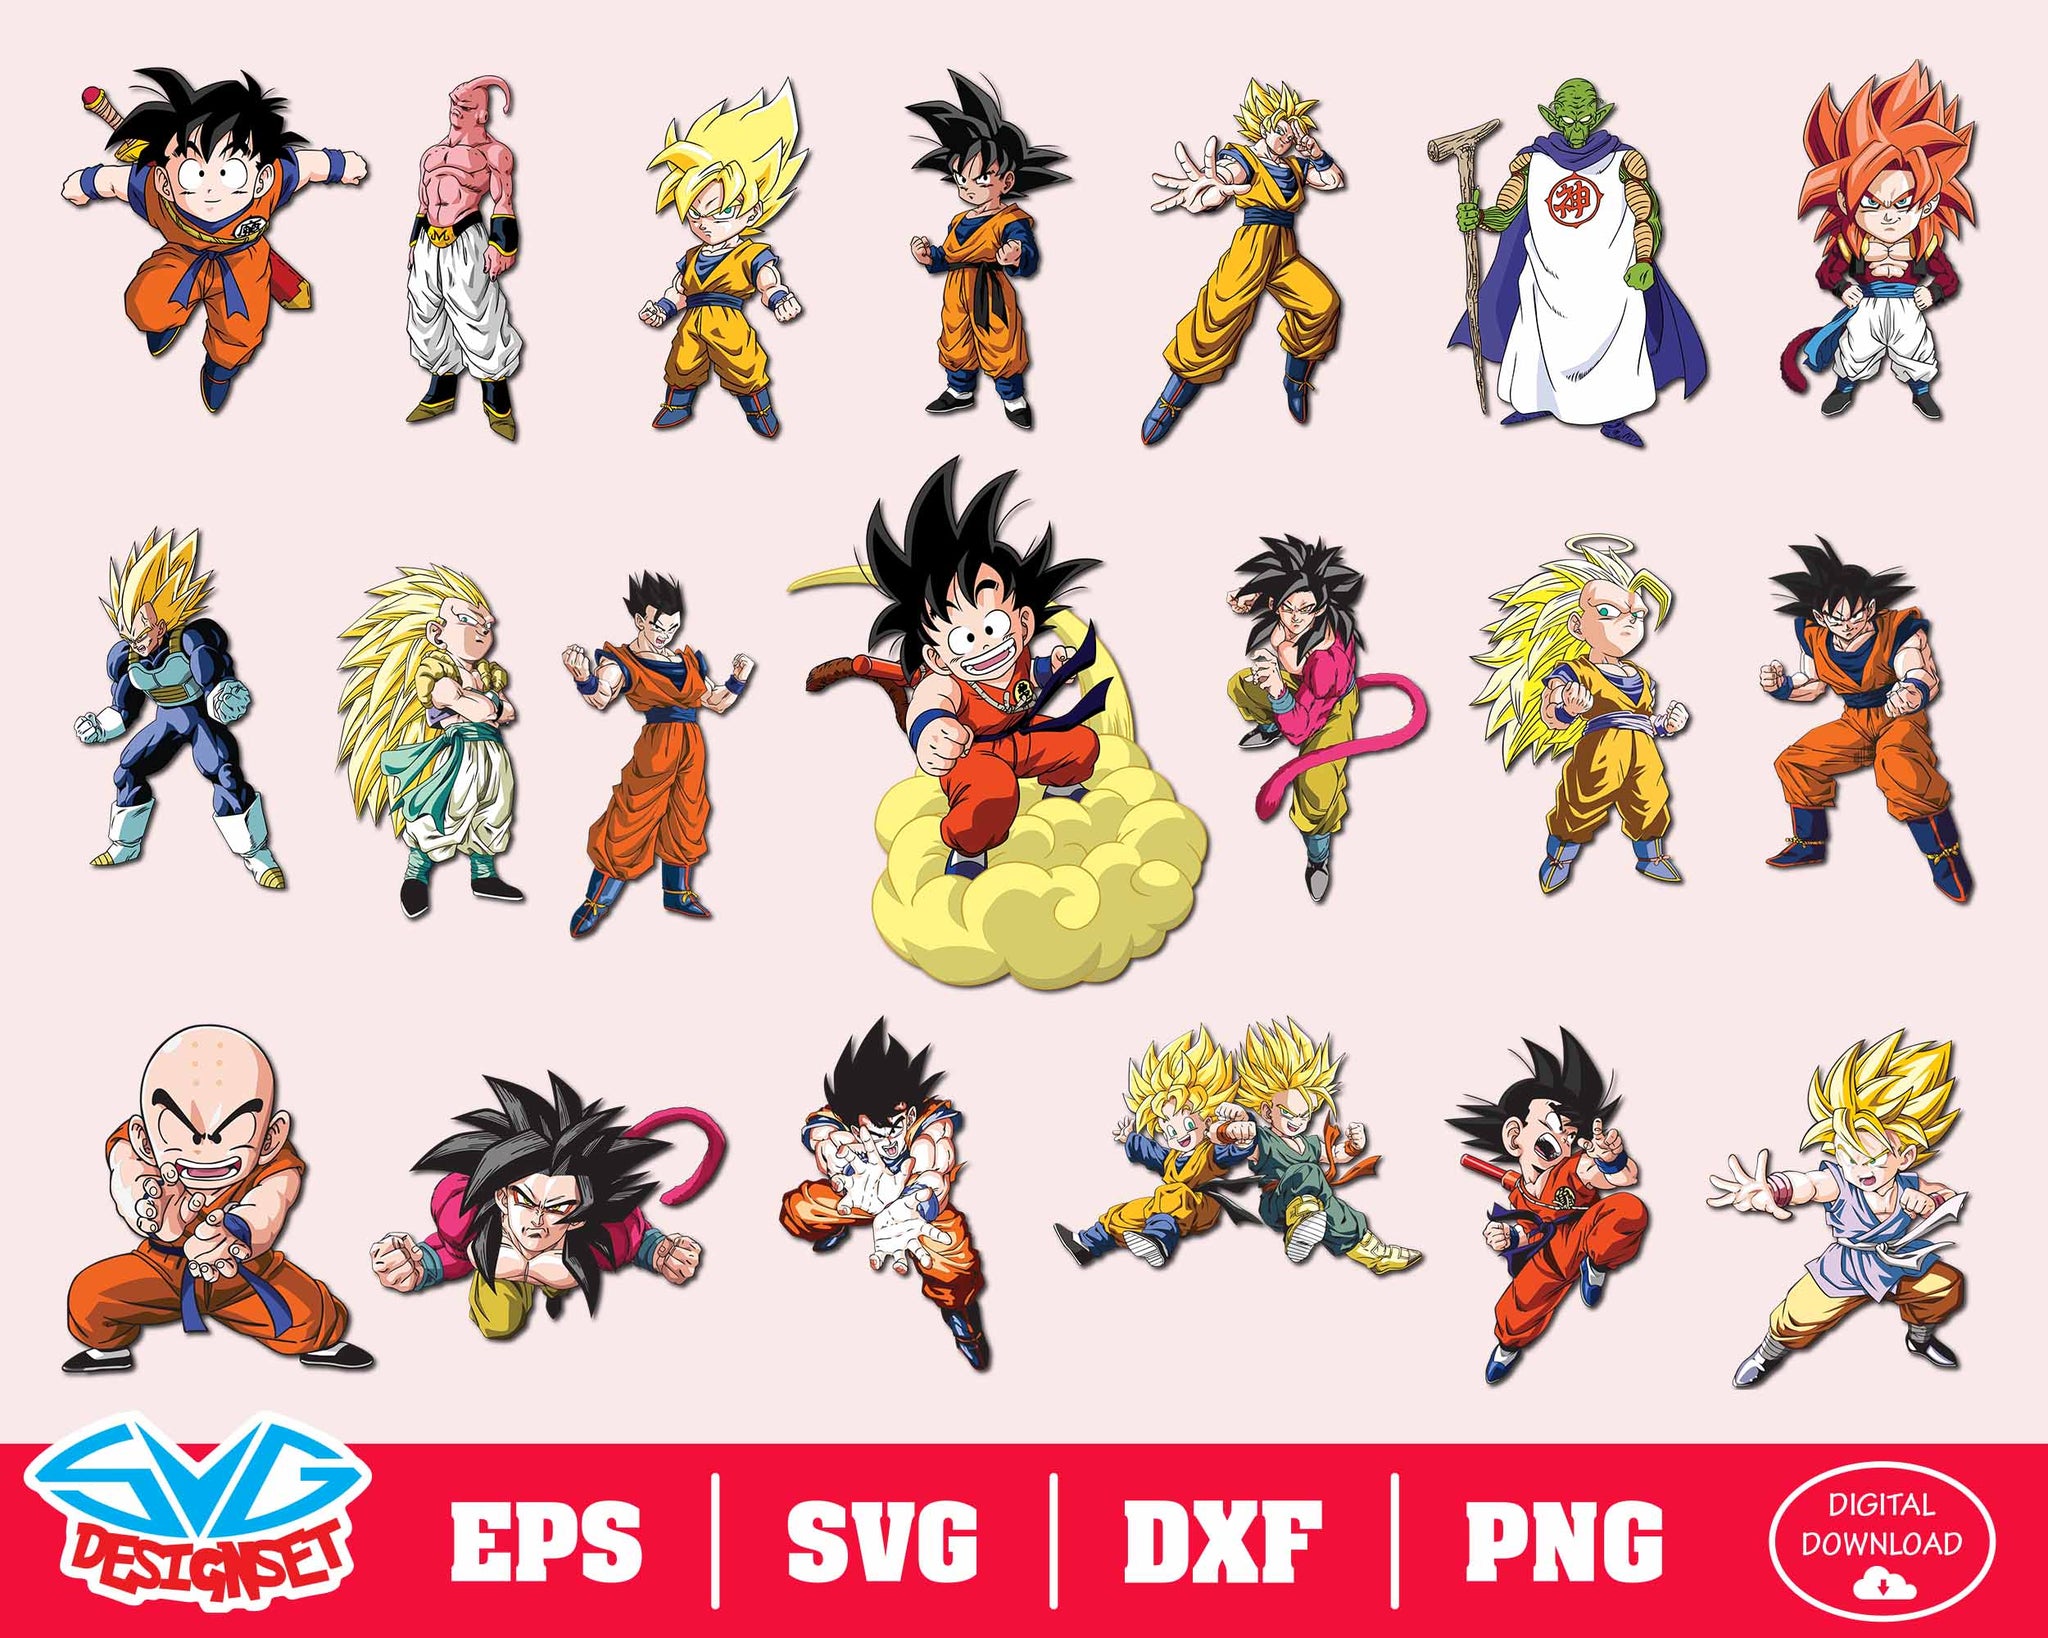 Dragon Ball Z Svg, Dxf, Eps, Png, Clipart, Silhouette and Cutfiles #1 - SVGDesignSets